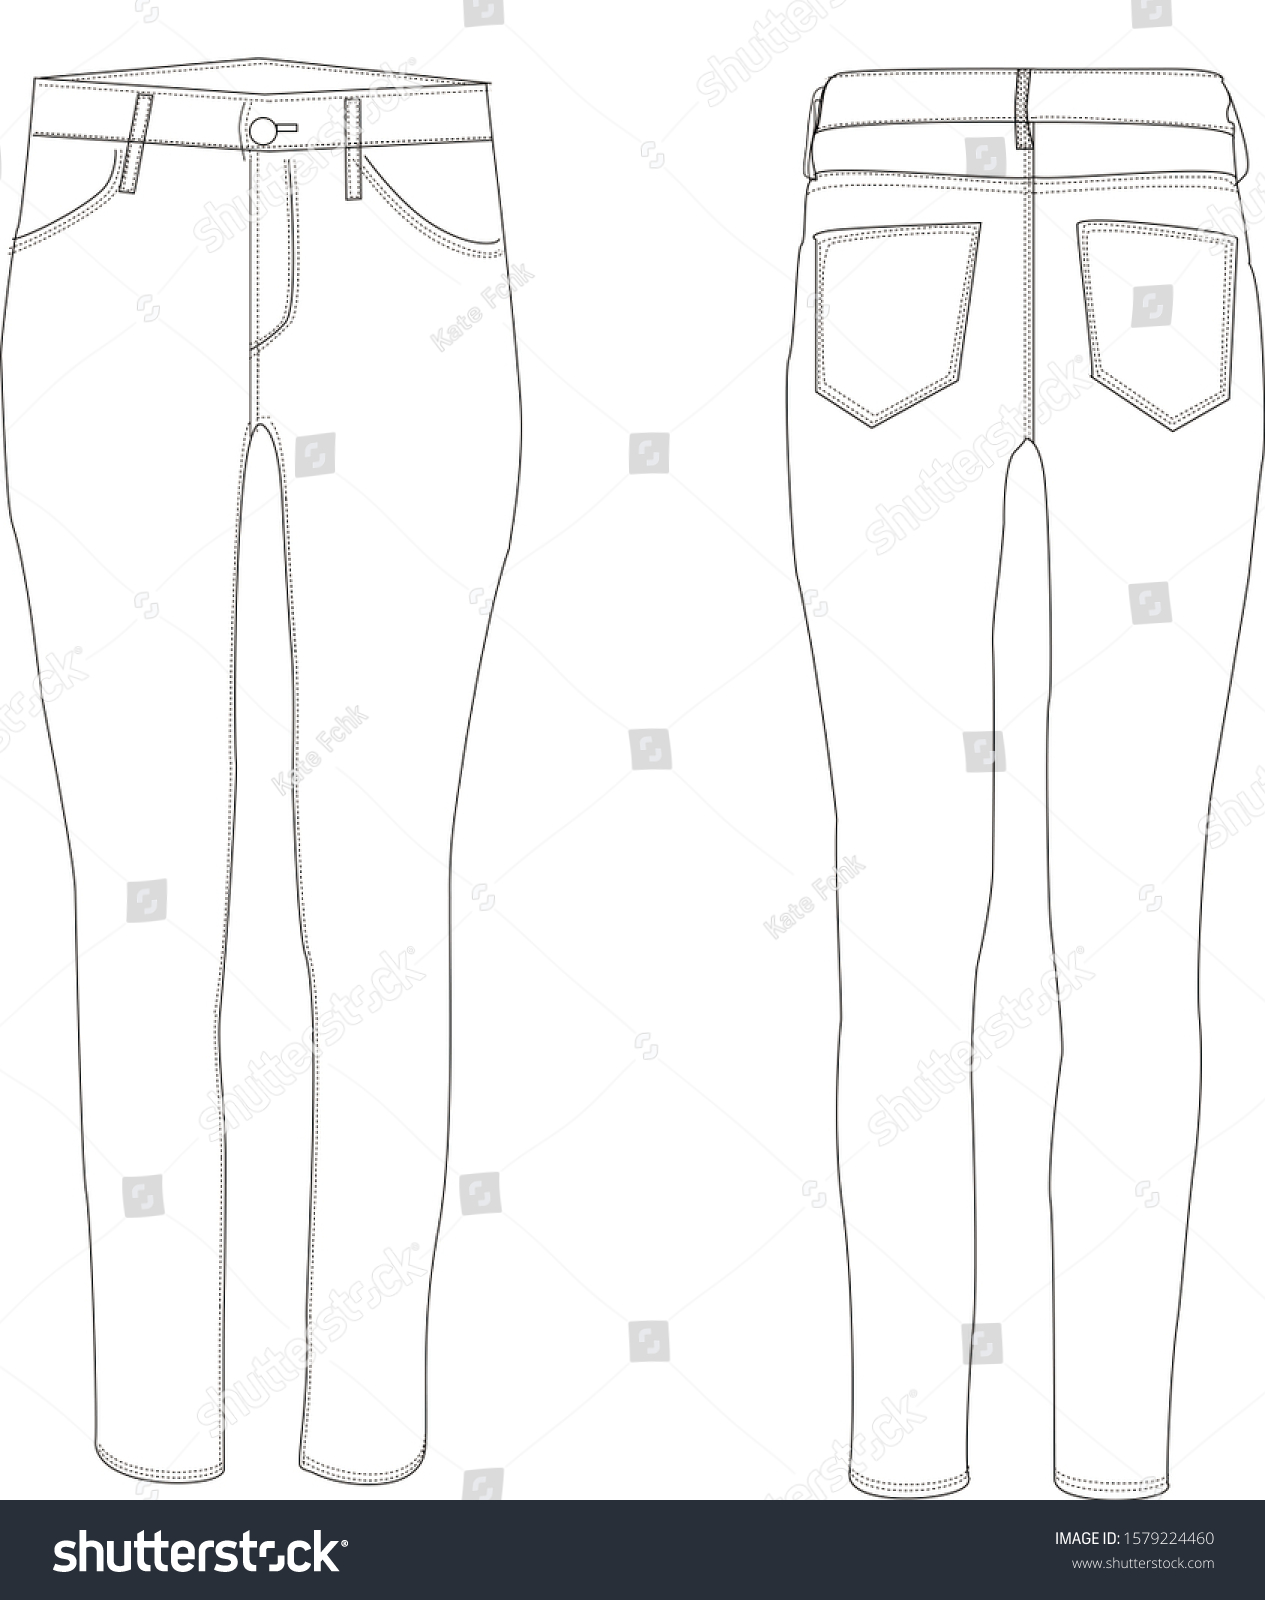 Fashion Sketch Jeans Front Back View Stock Illustration 1579224460 ...